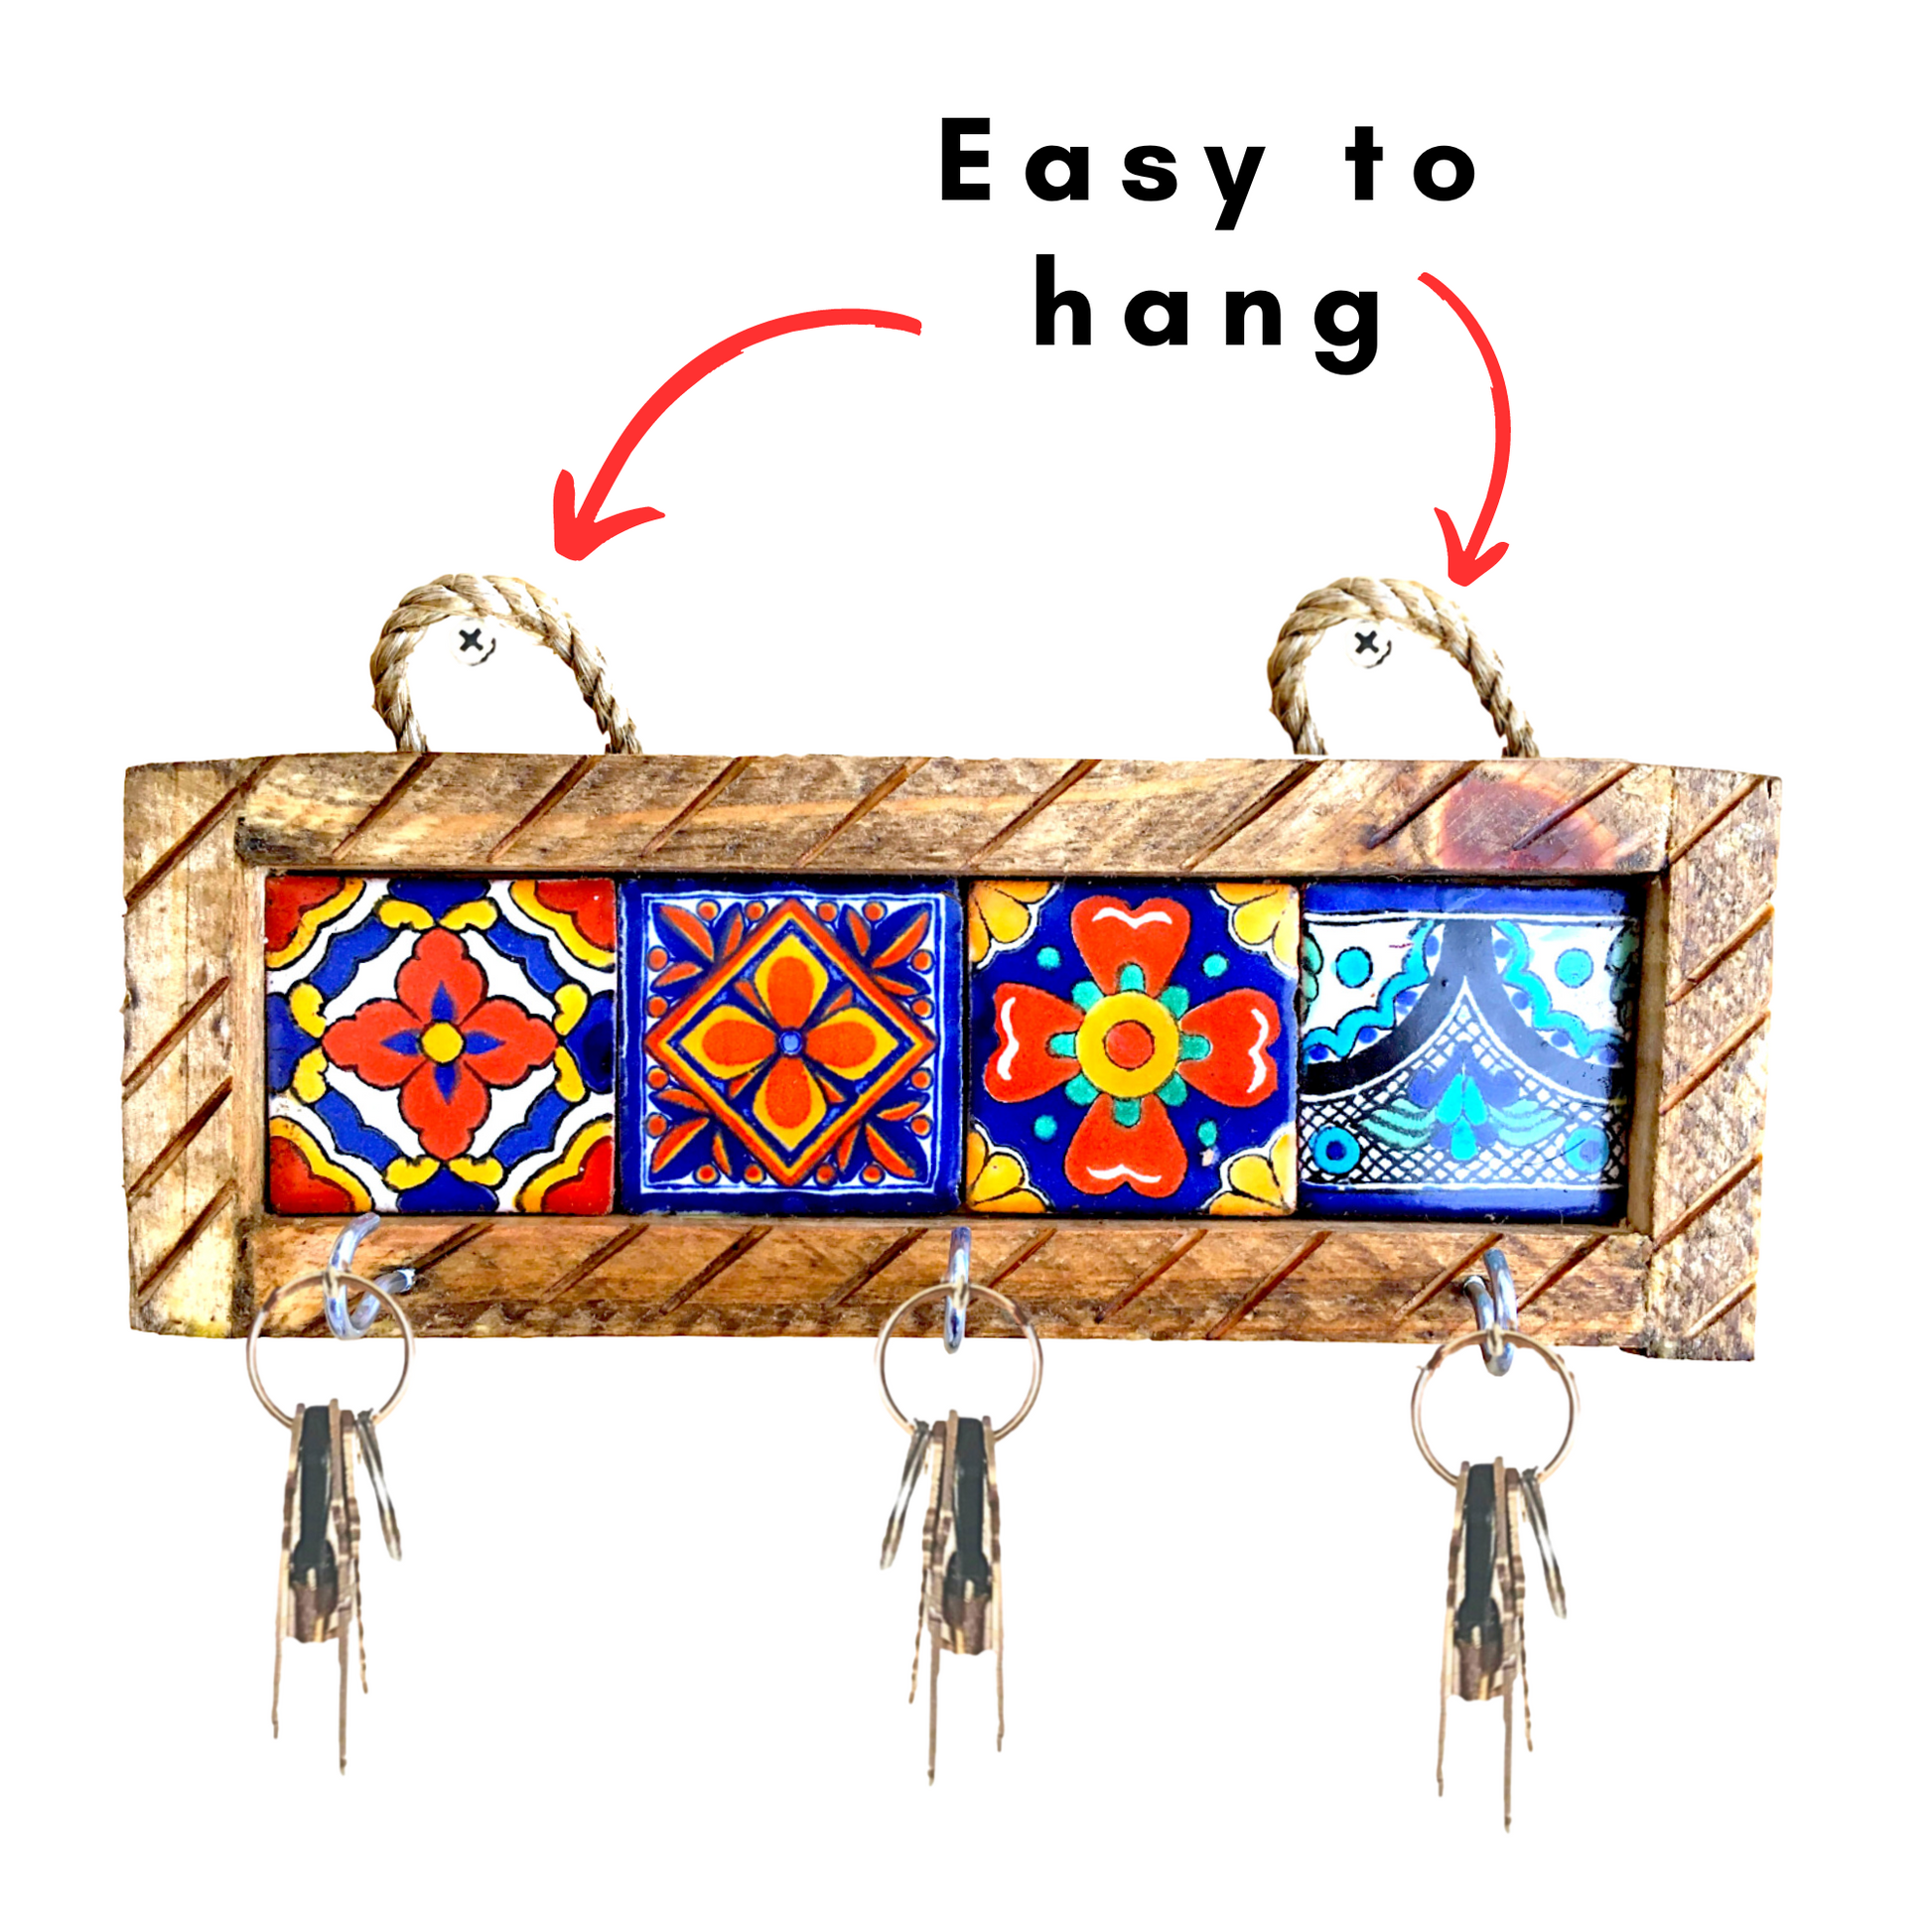 easy to hang Handmade Mexican Talavera Tiles Key Holder, perfect for key organization and for adding vibrant Mexican style to your home.